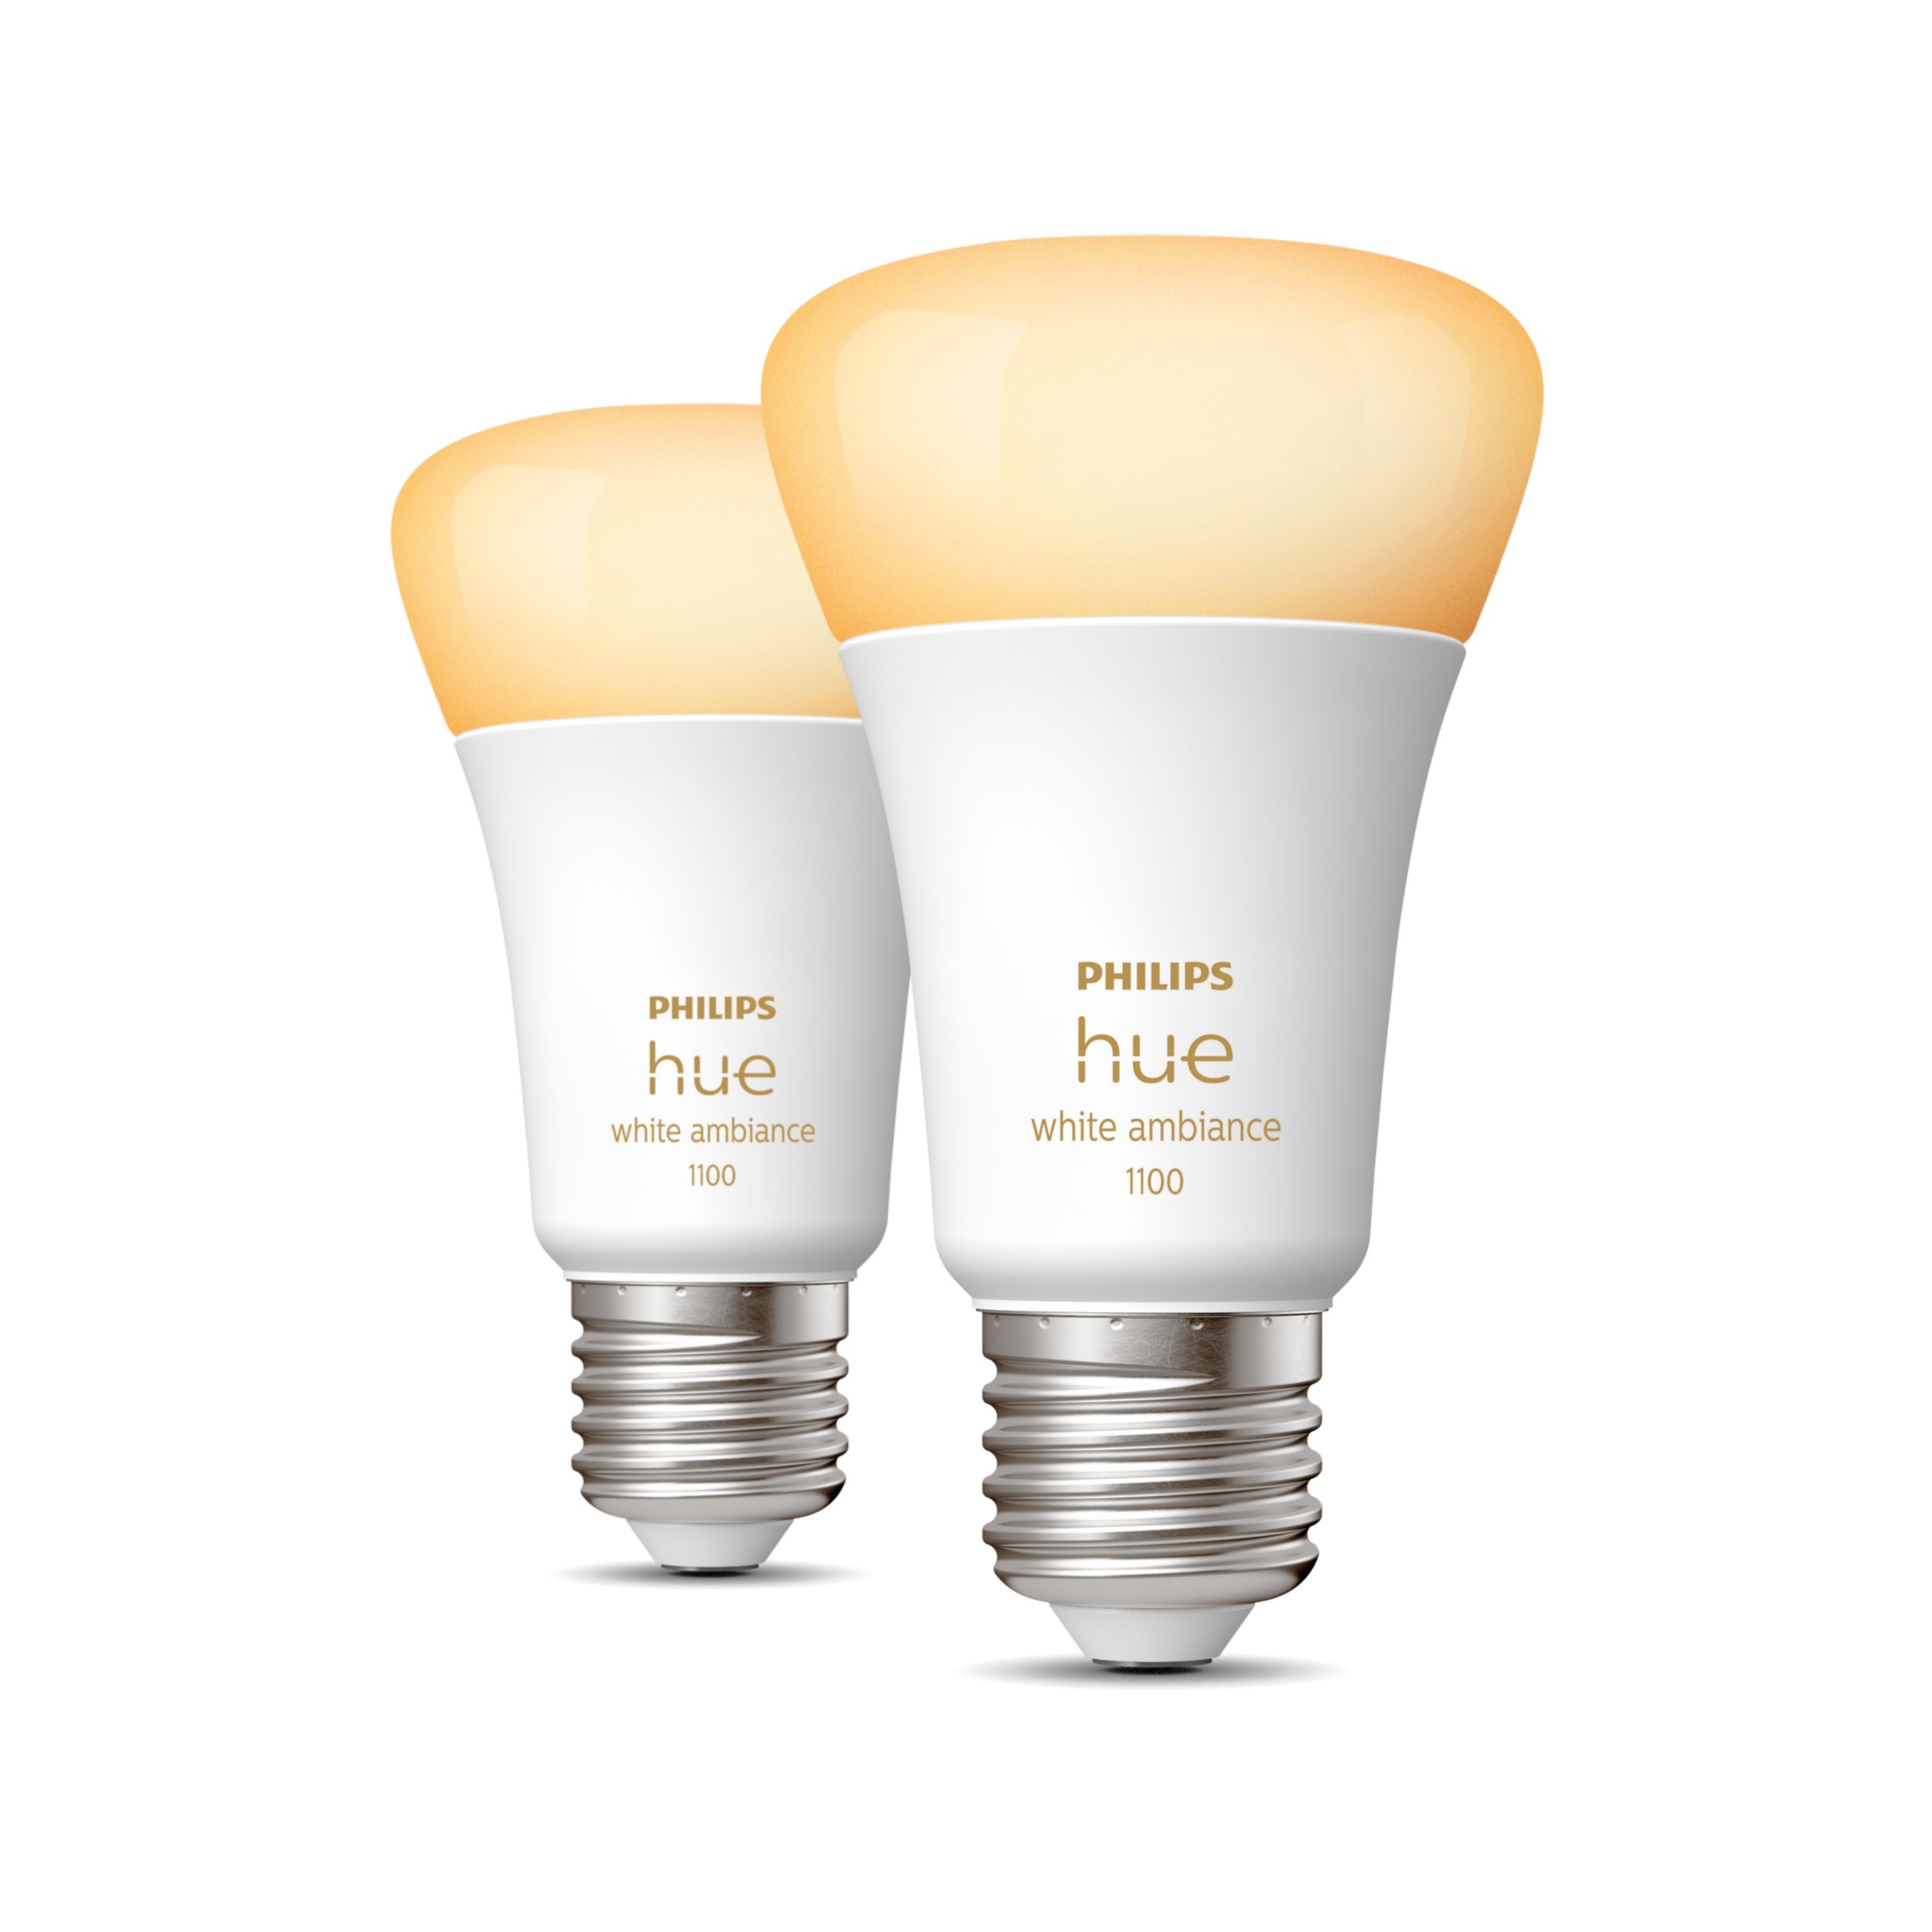 Philips Hue Smart 75W A19 LED Bulb - Soft Warm White Light - 1 Pack -  1100LM - E26 - Indoor - Control with Hue App - Works with Alexa, Google